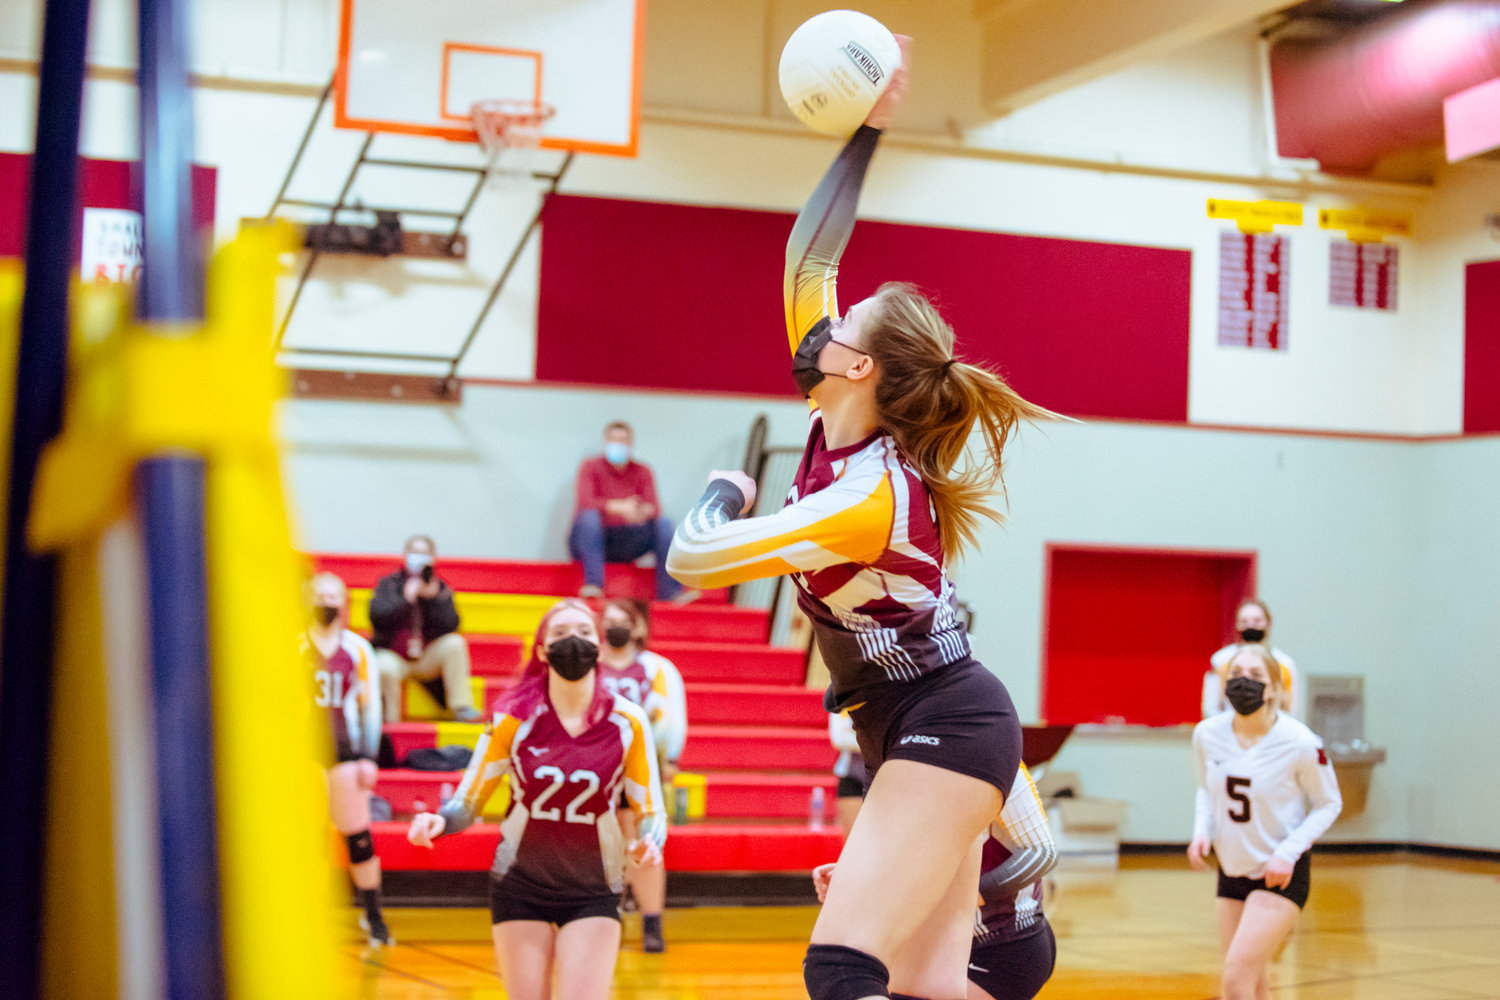 Winlock's Karlie Jones (23) hits the ball during a game against Toledo played Monday night in Winlock.